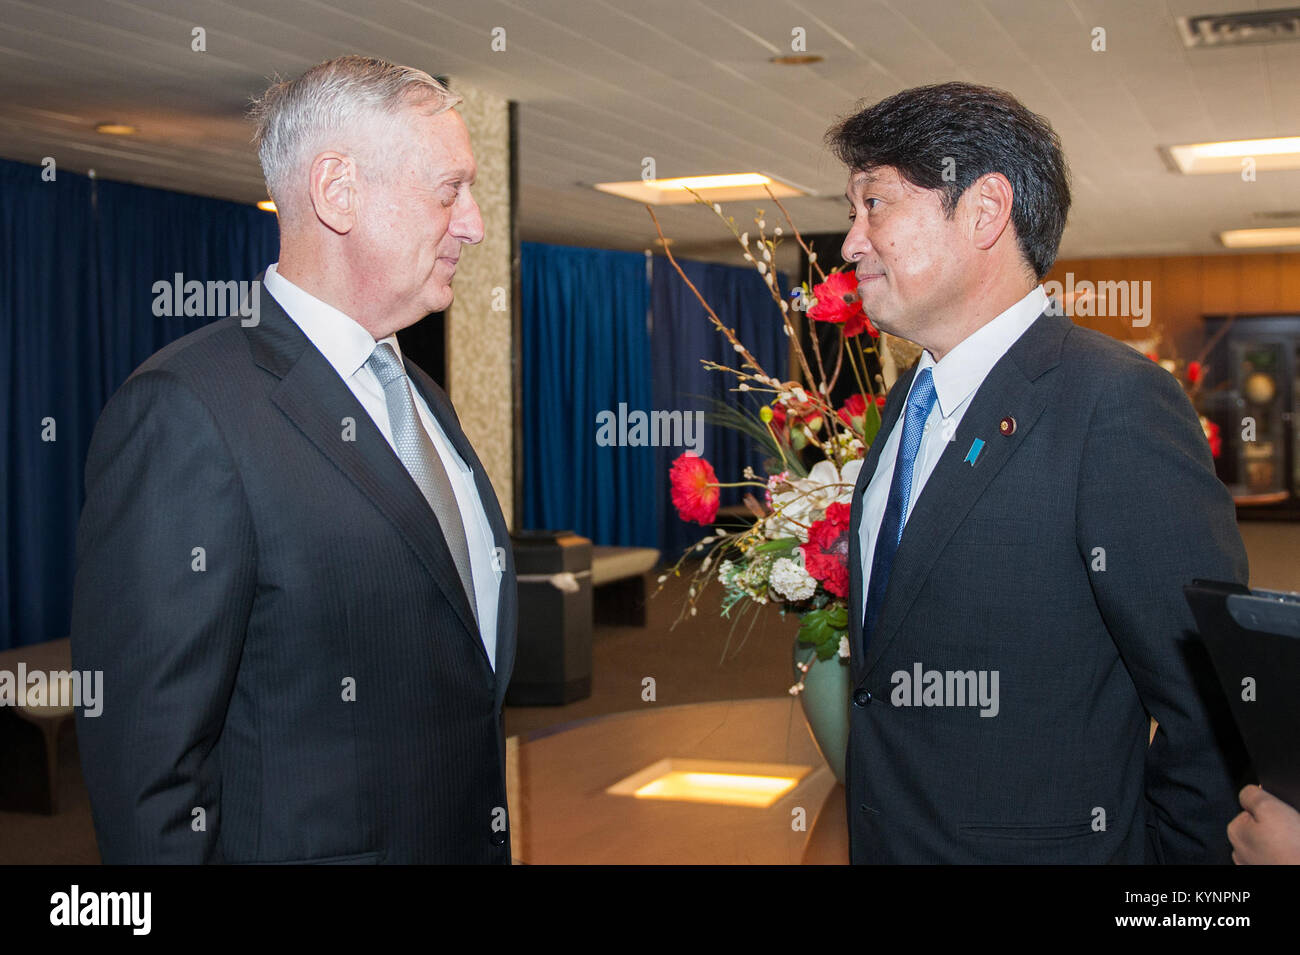 U.S. Secretary of Defense Jim Mattis speaks with Japanese Defense Minister Itsunori Onodera before the start of the U.S.-Japan Security Consultative Committee (“2+2”), at the U.S. Department of State in Washington, D.C., on August 17, 2017. [State Department Photo/ ] Defense Secretary Mattis Speaks With Japanese Defense Minister Onodera 35795771584 o Stock Photo